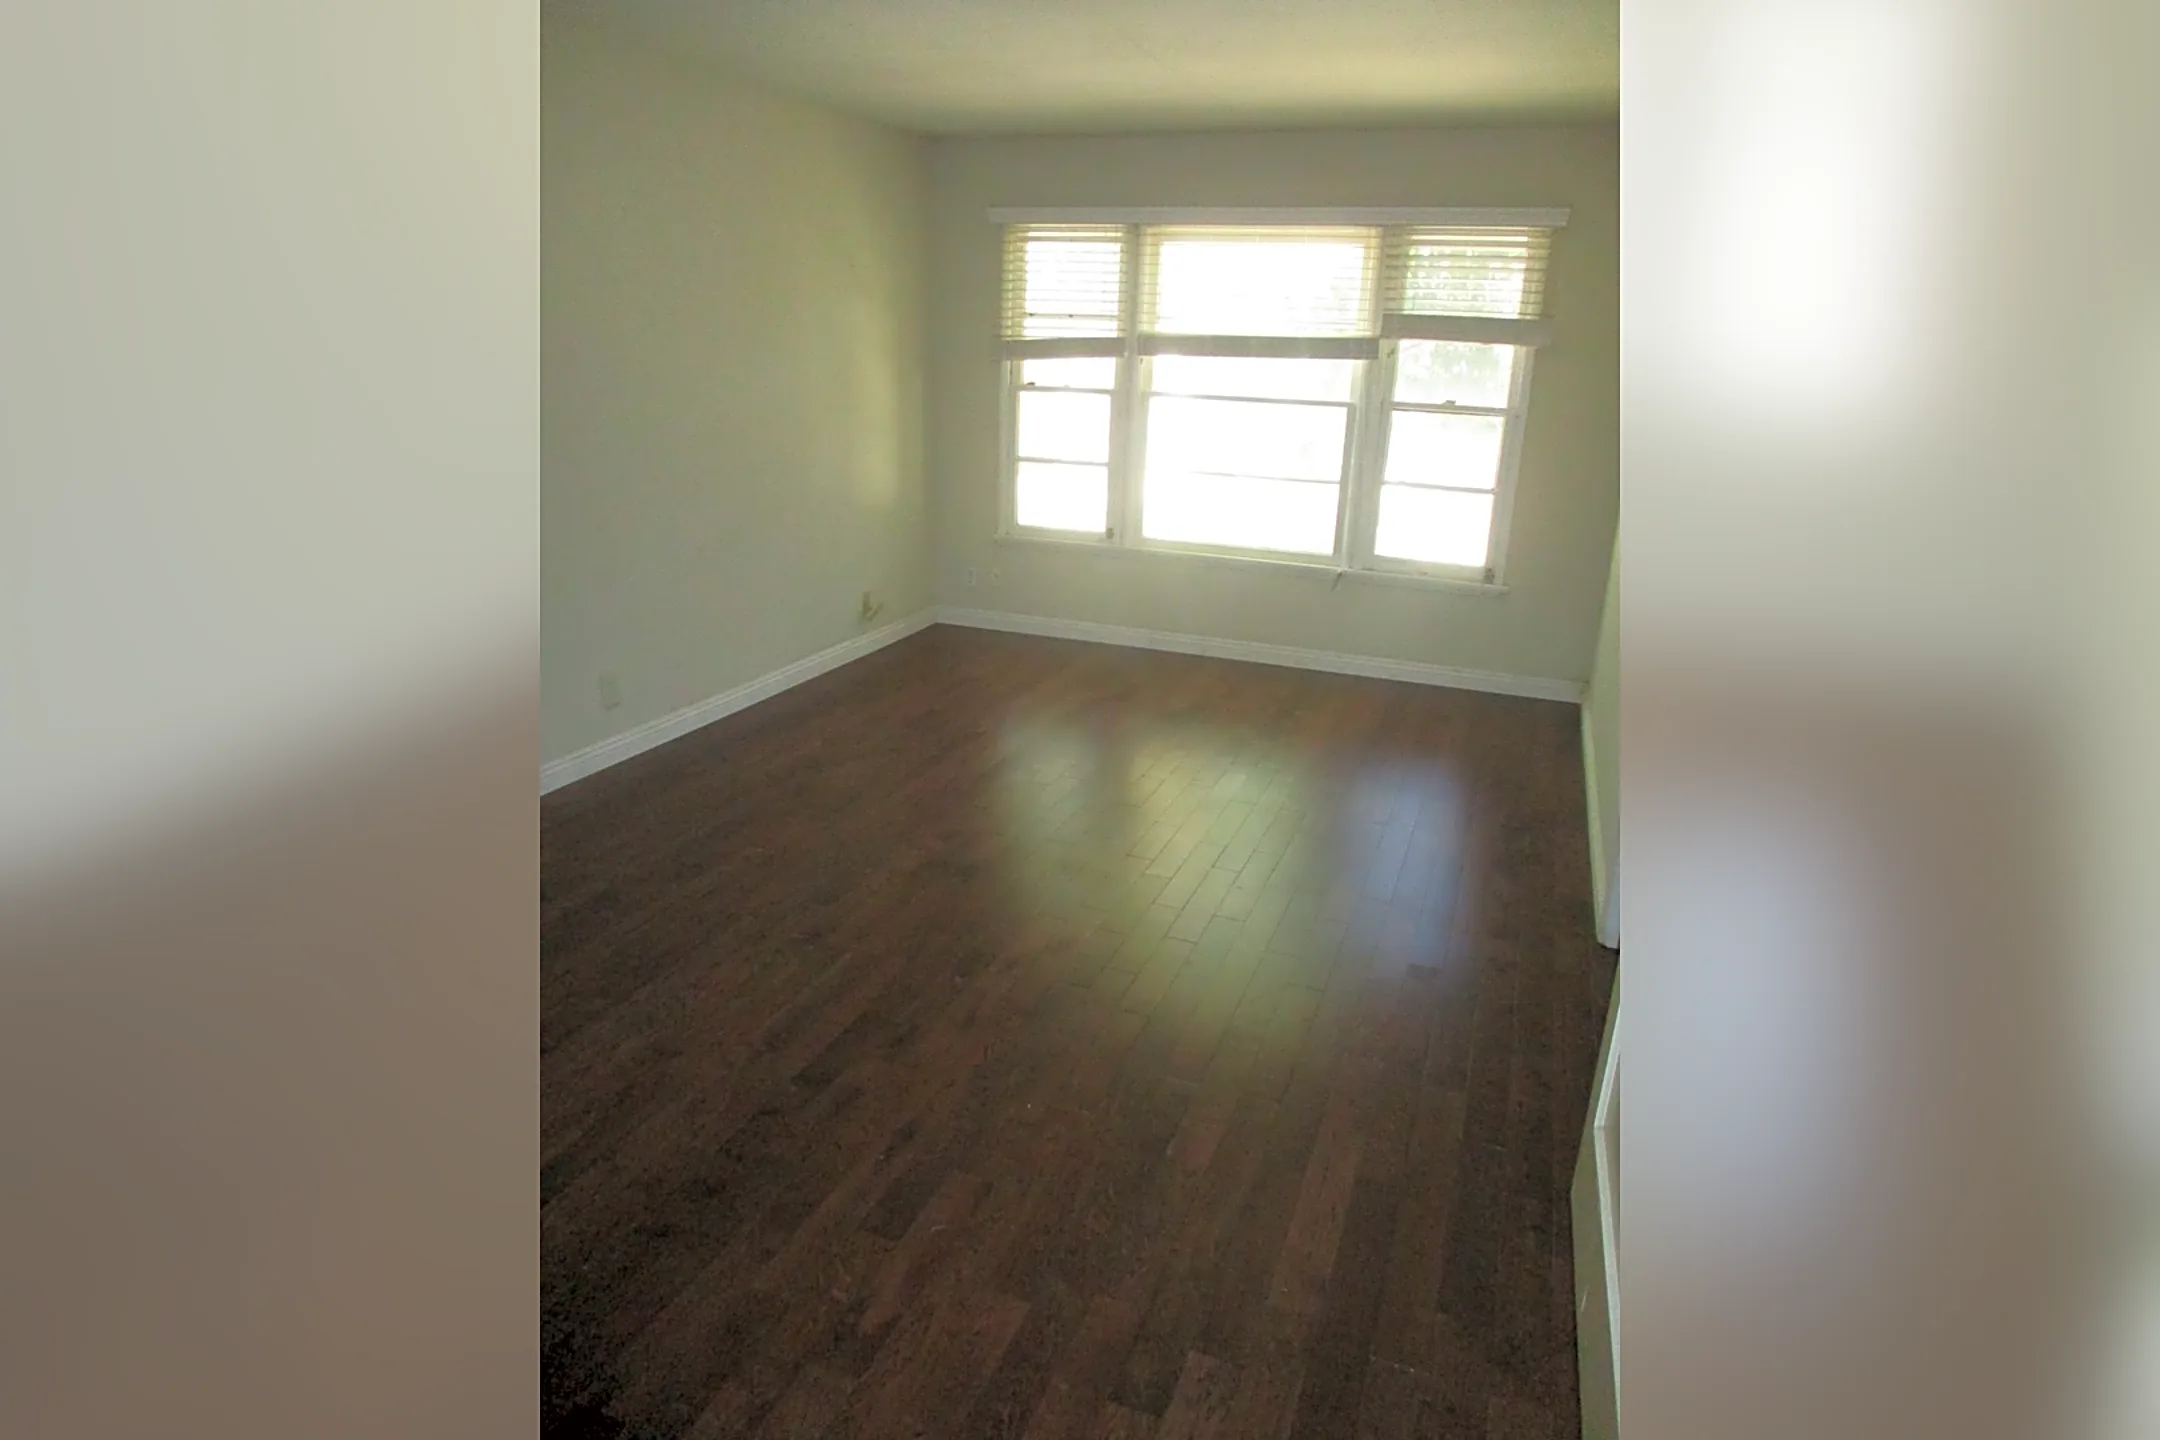 4620 N Banner Dr | Long Beach, CA Houses for Rent | Rent.